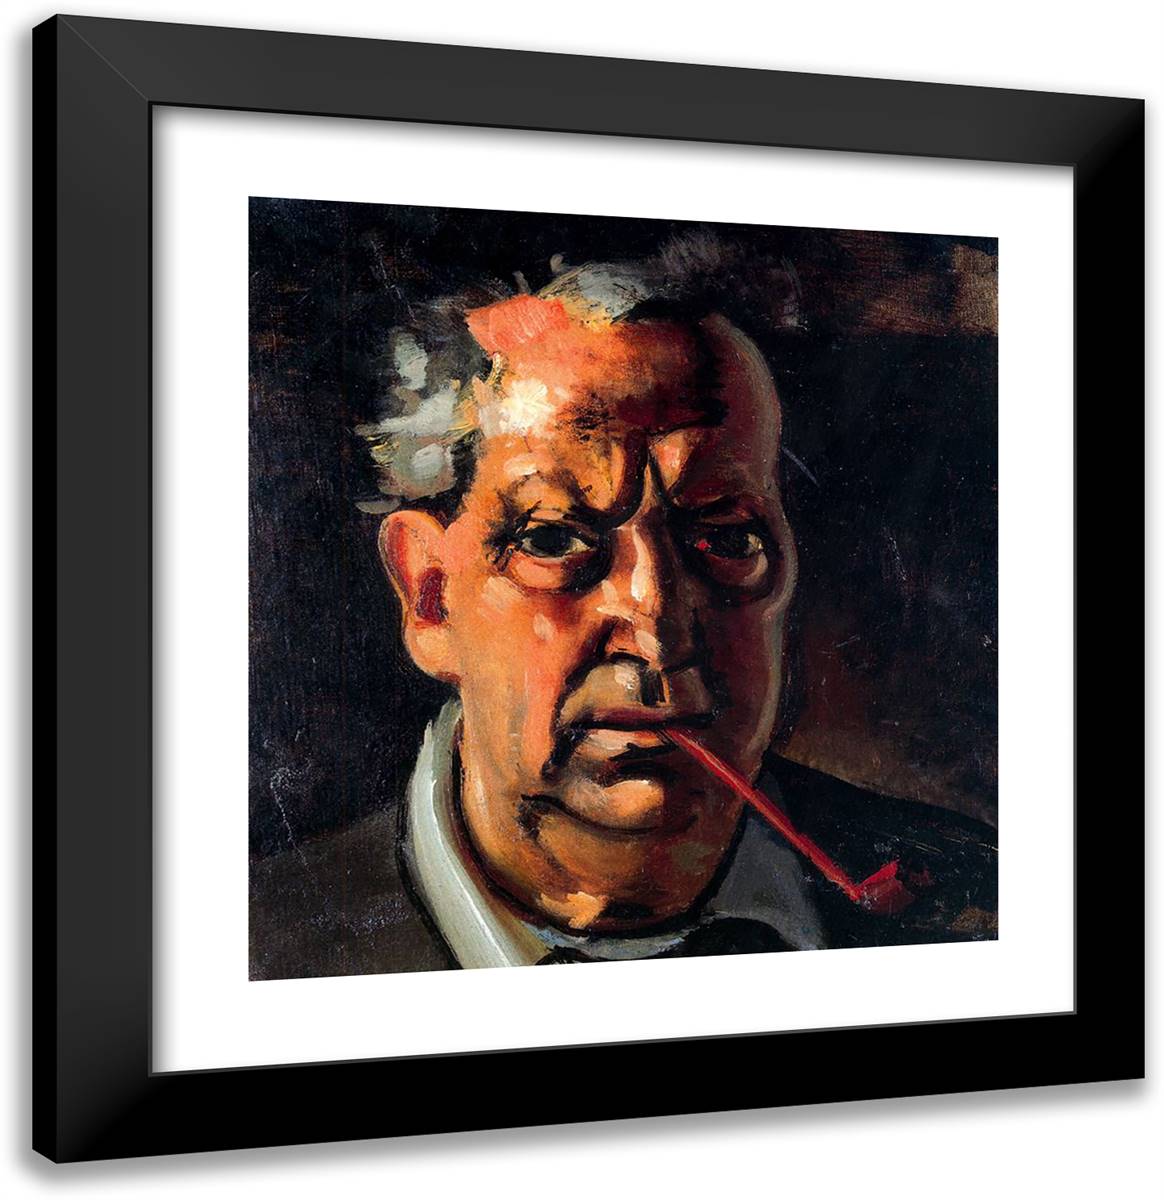 Self-Portrait with a Pipe 20x21 Black Modern Wood Framed Art Print Poster by Derain, Andre